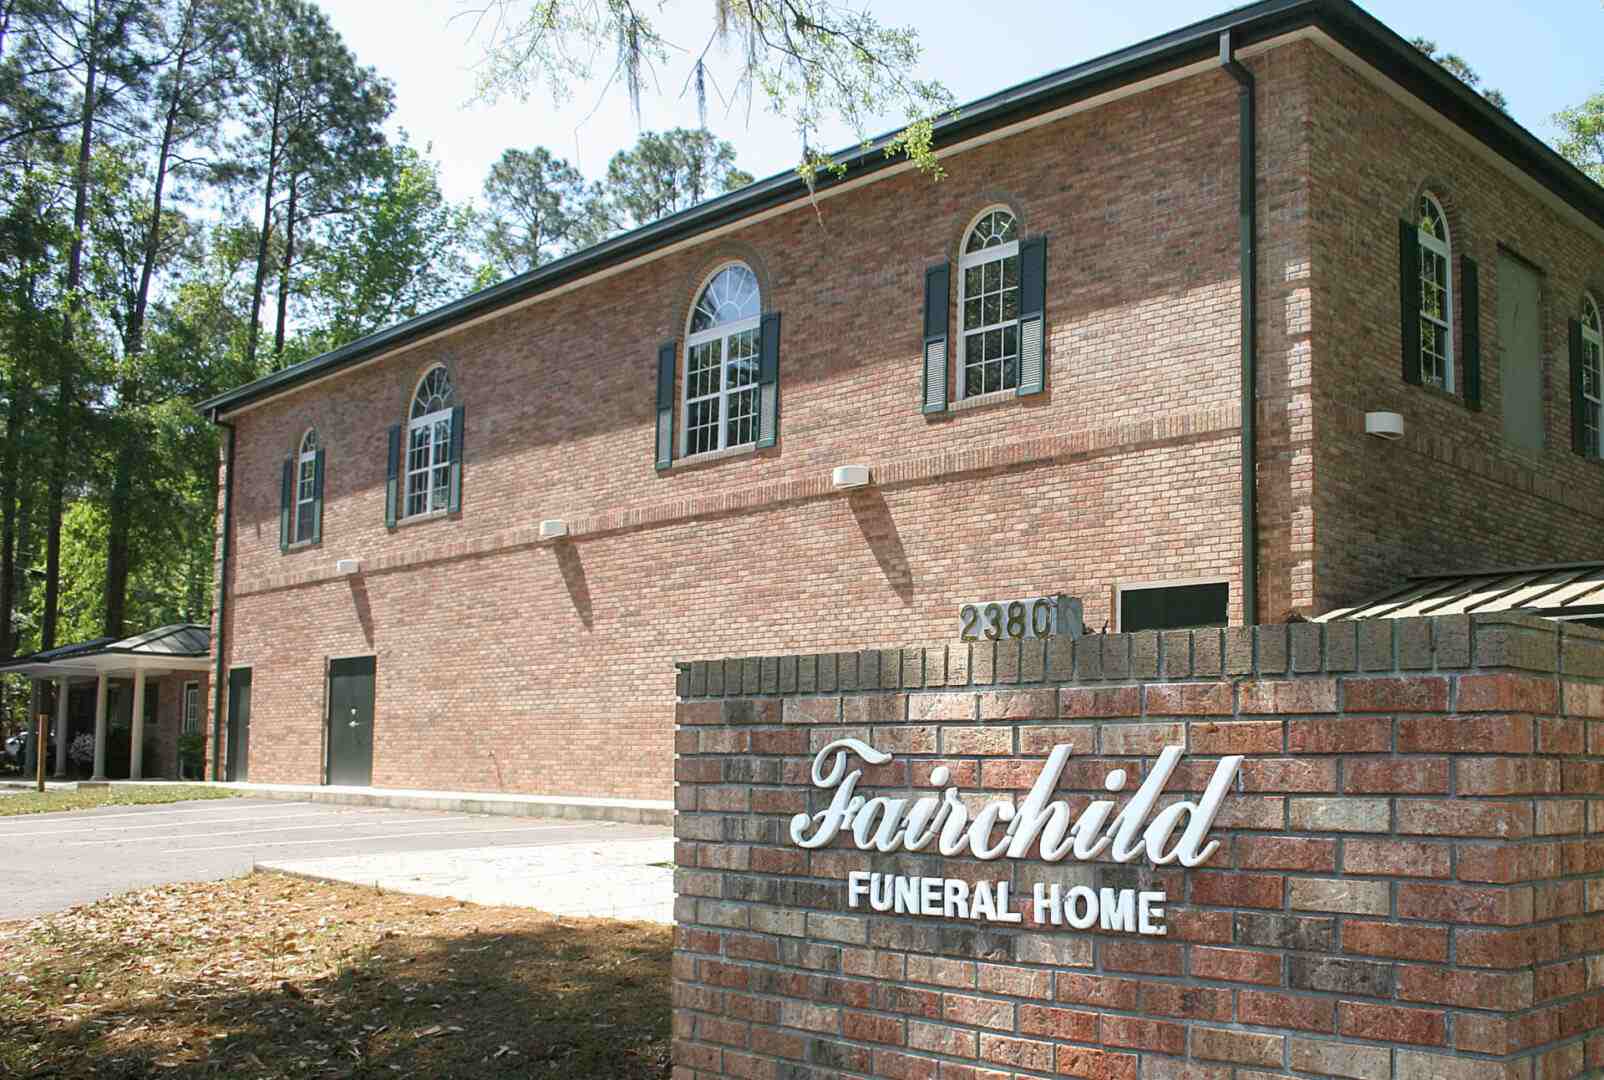 FairchildFuneralHome-scaled